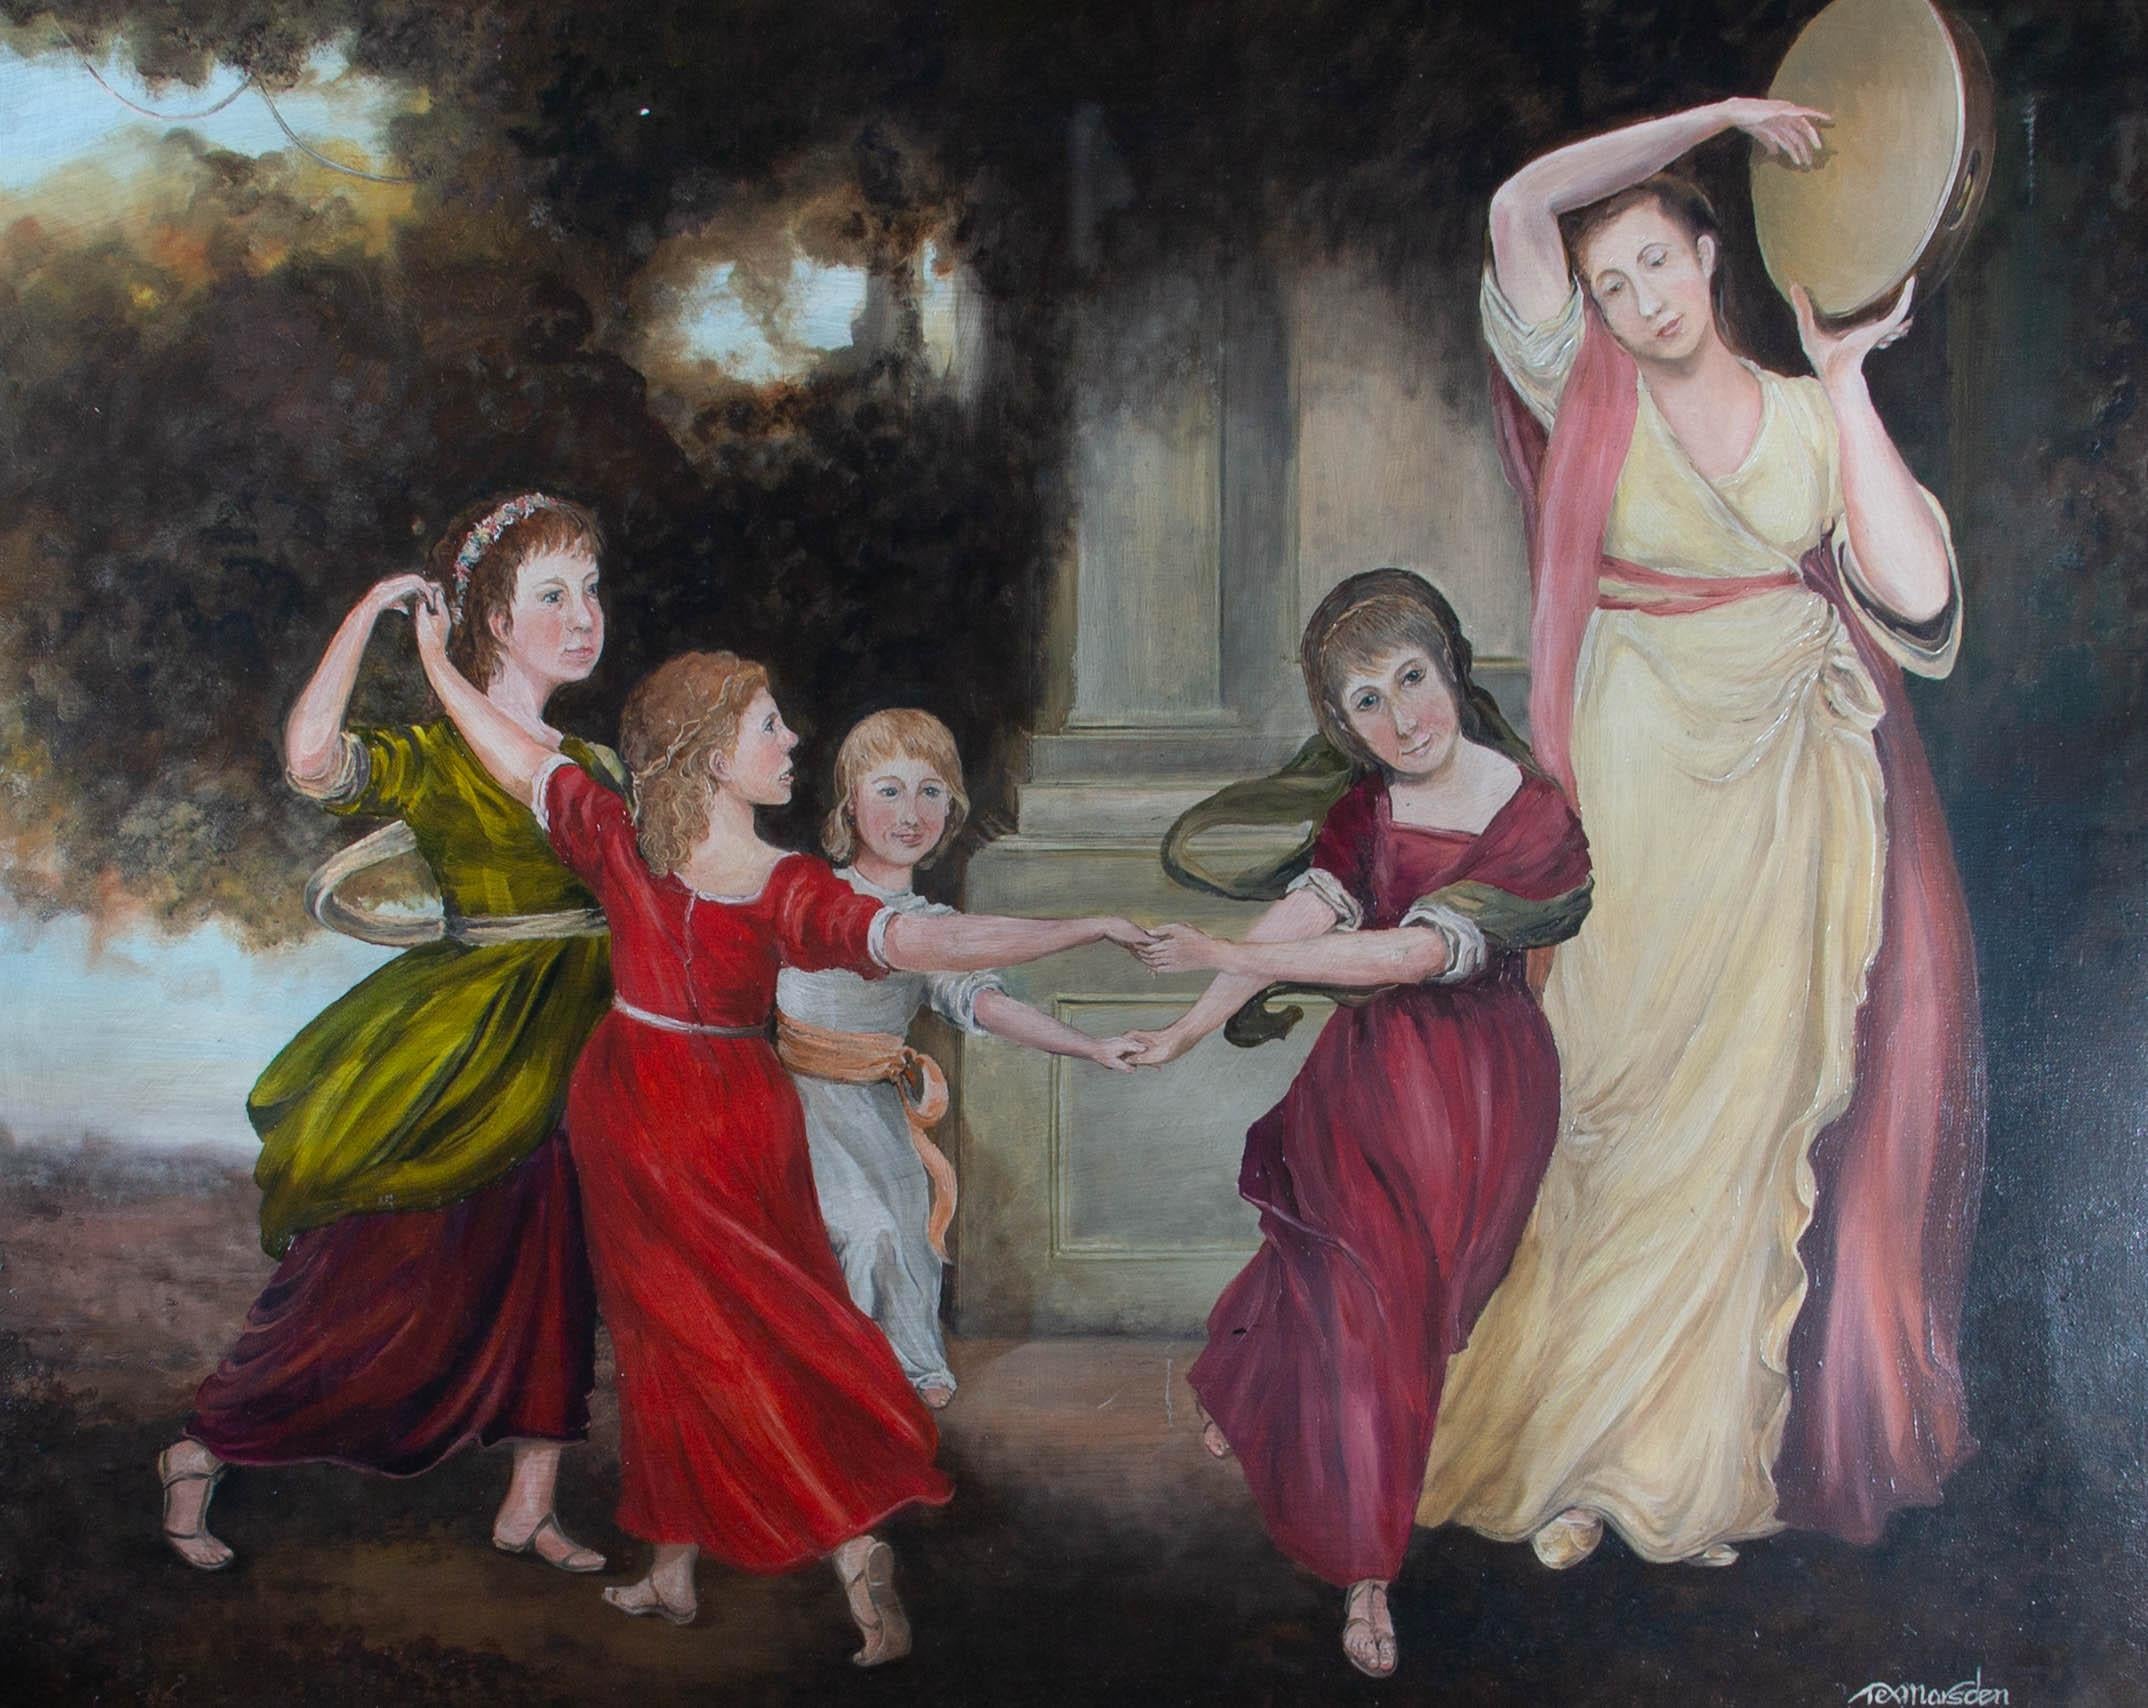 An impressively sized contemporary copy of the original painting of the Gower family children by the renowned British portrait painter, George Romney. The artist has signed to the lower right corner and the painting has been presented in a